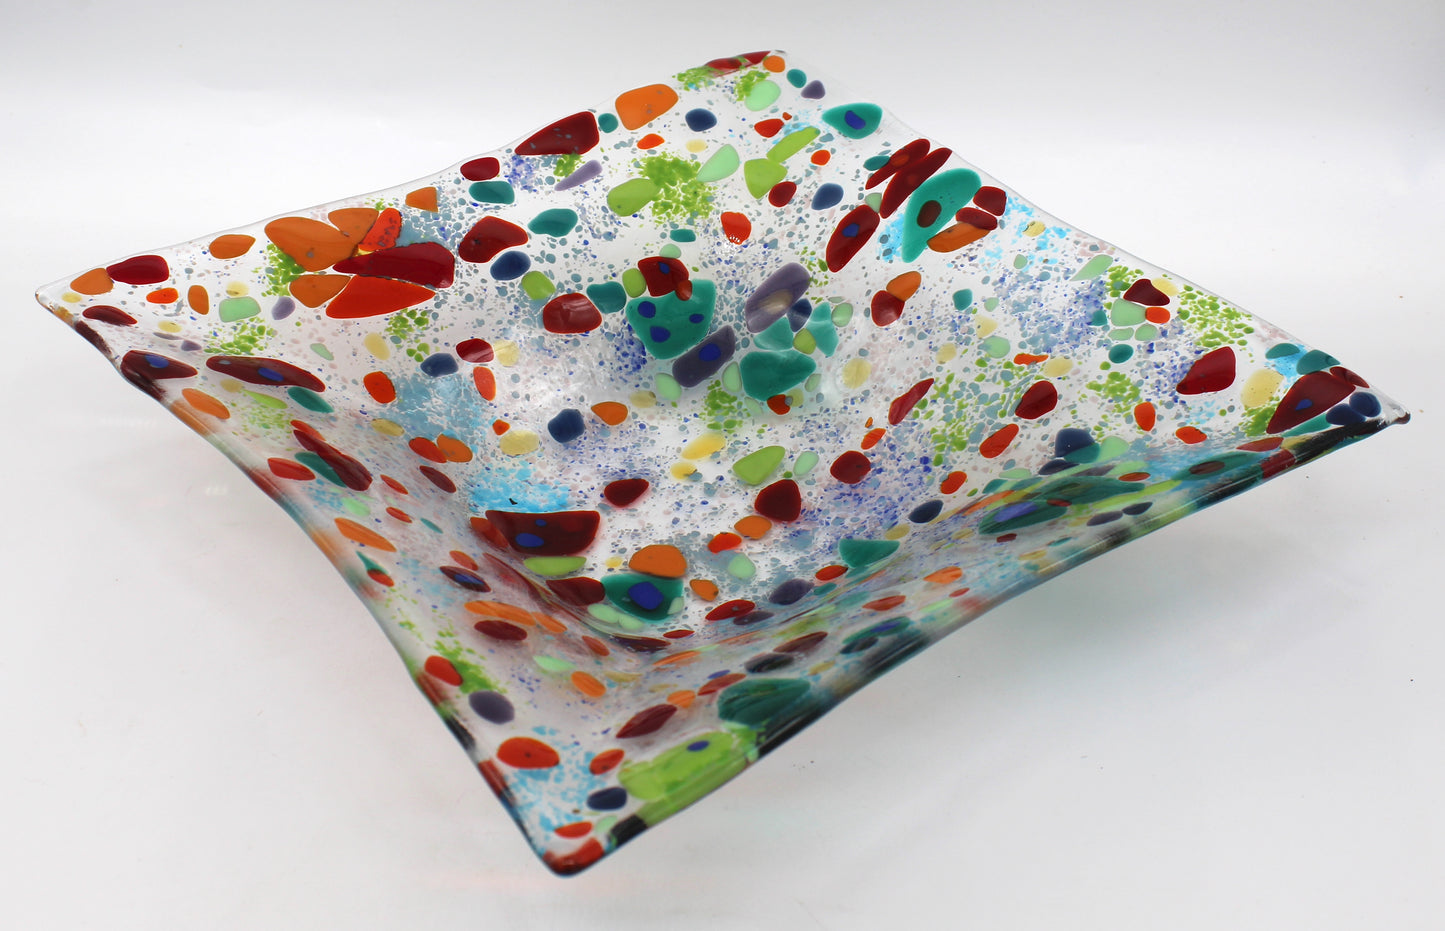  clear glass square bowl withe spots of red and greens, with specks of blue